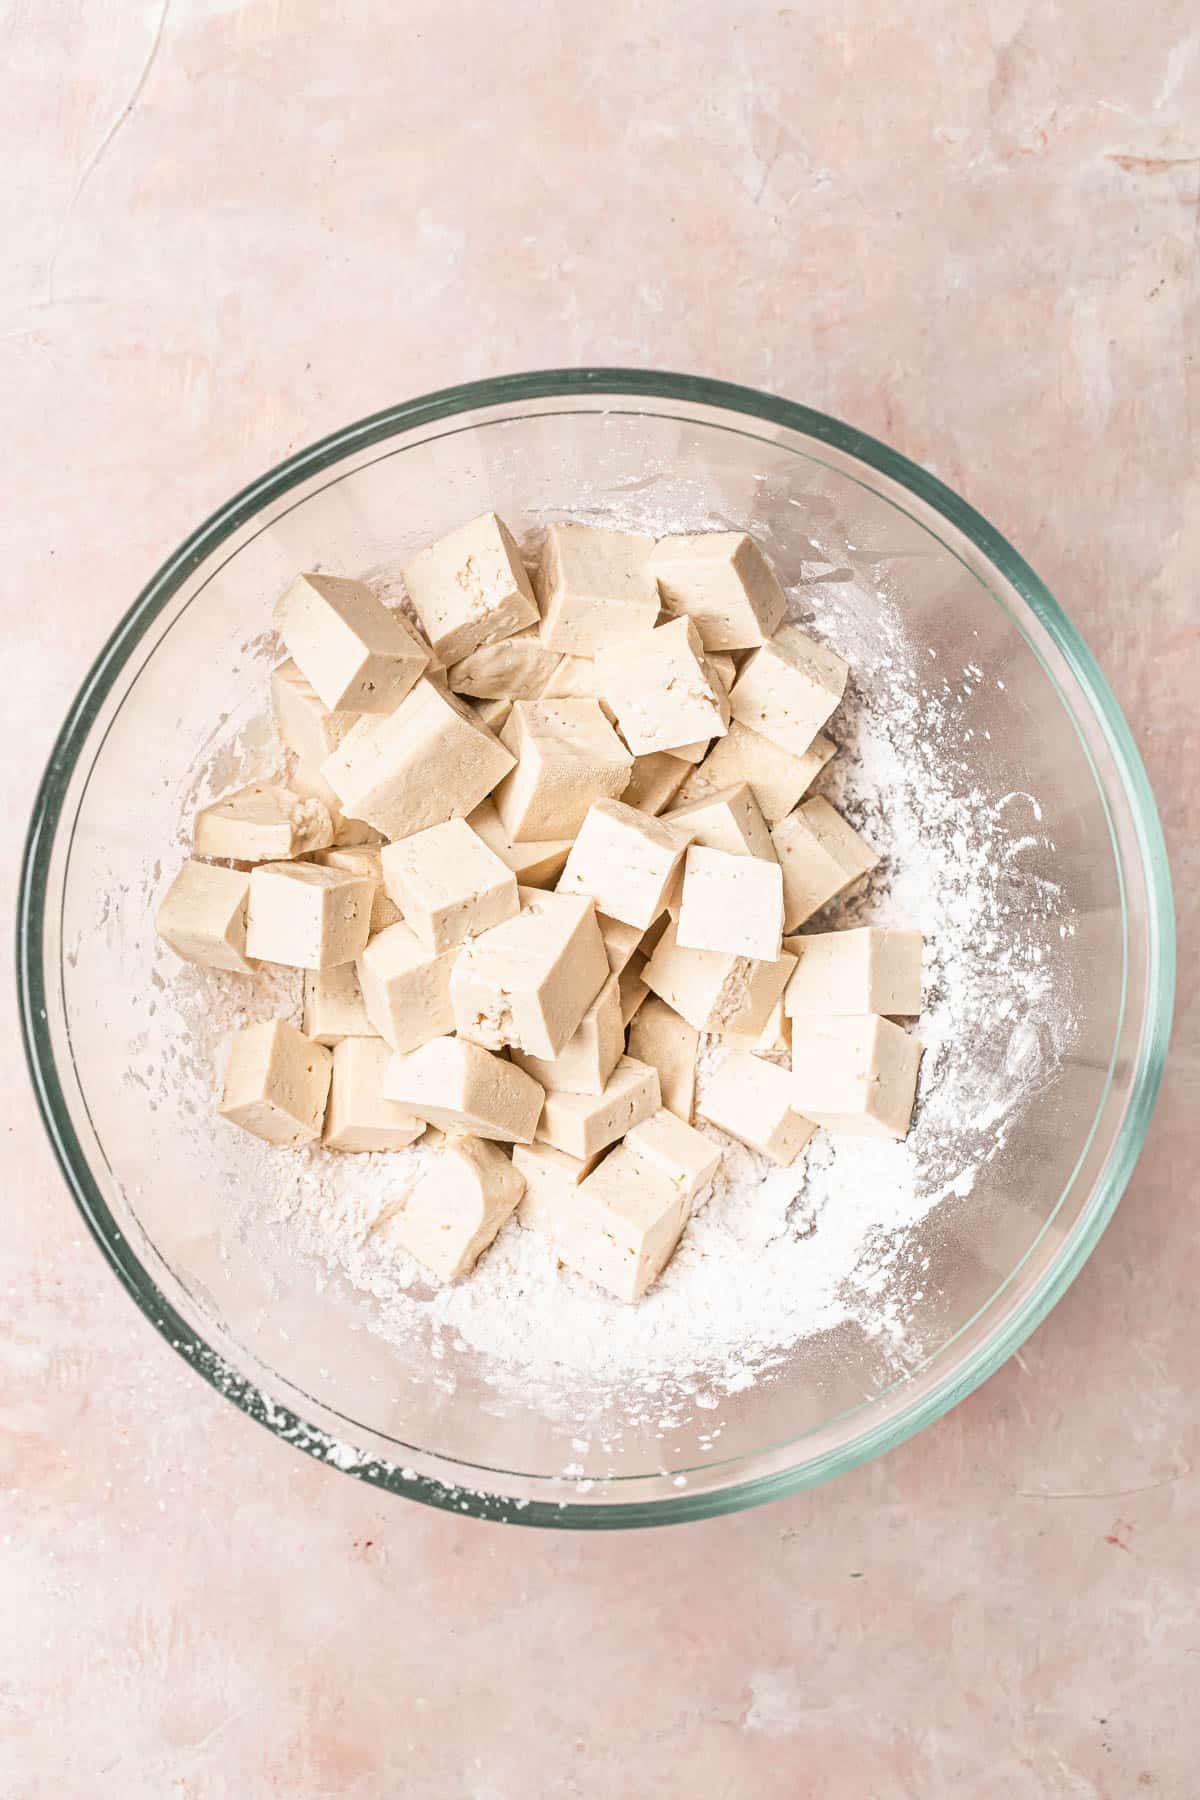 Tofu cubes added to a bowl of flour mixture.